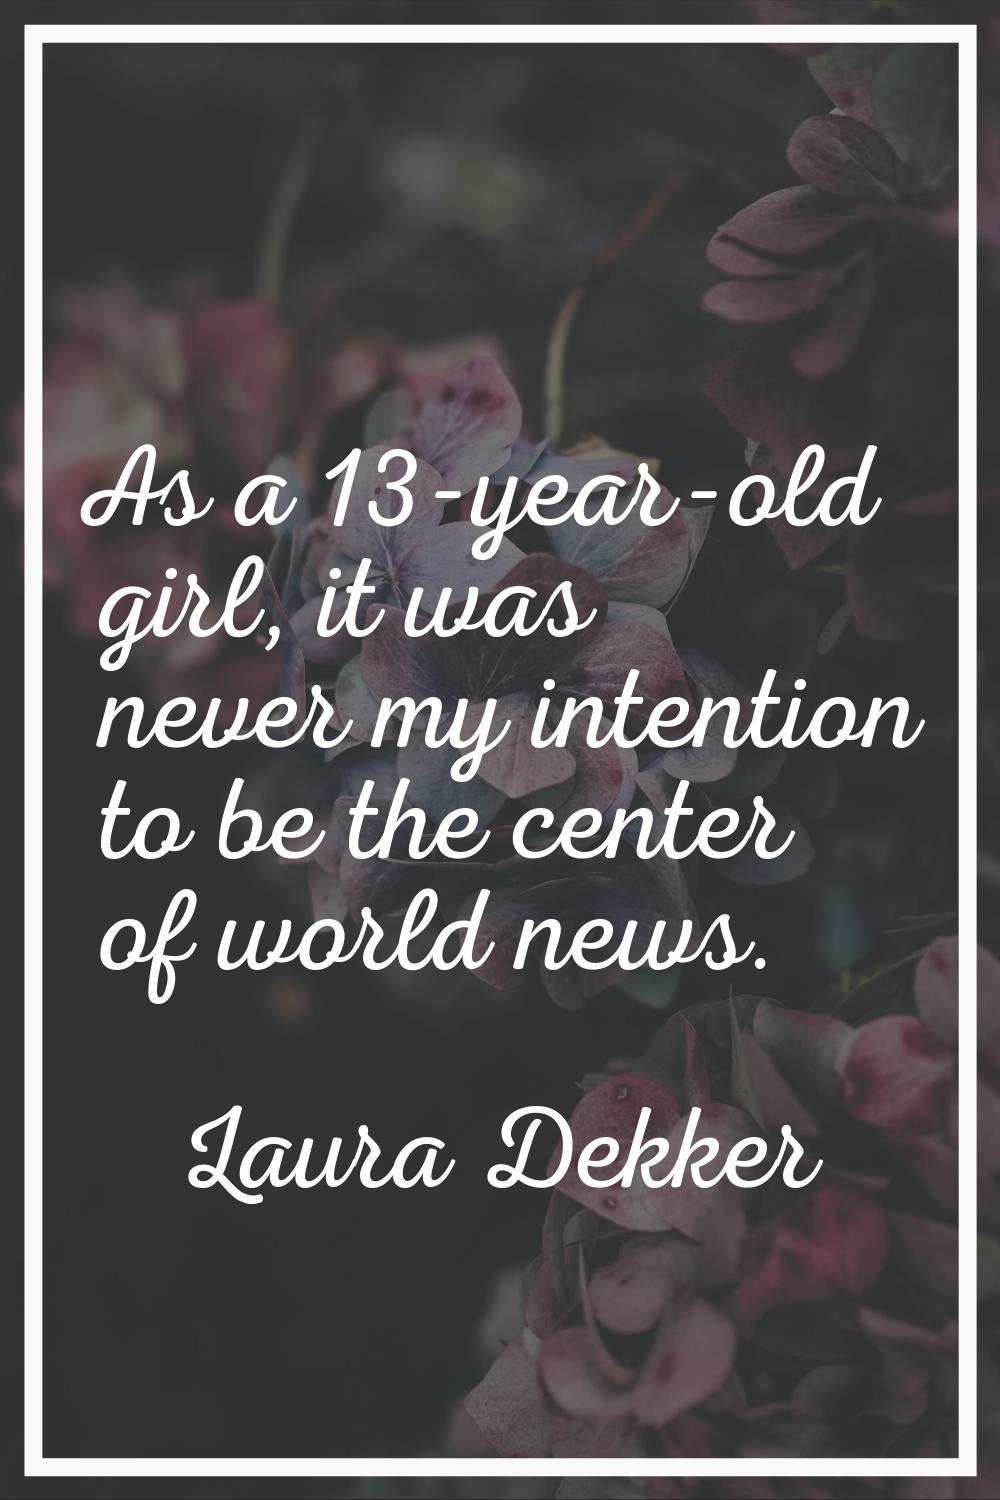 As a 13-year-old girl, it was never my intention to be the center of world news.